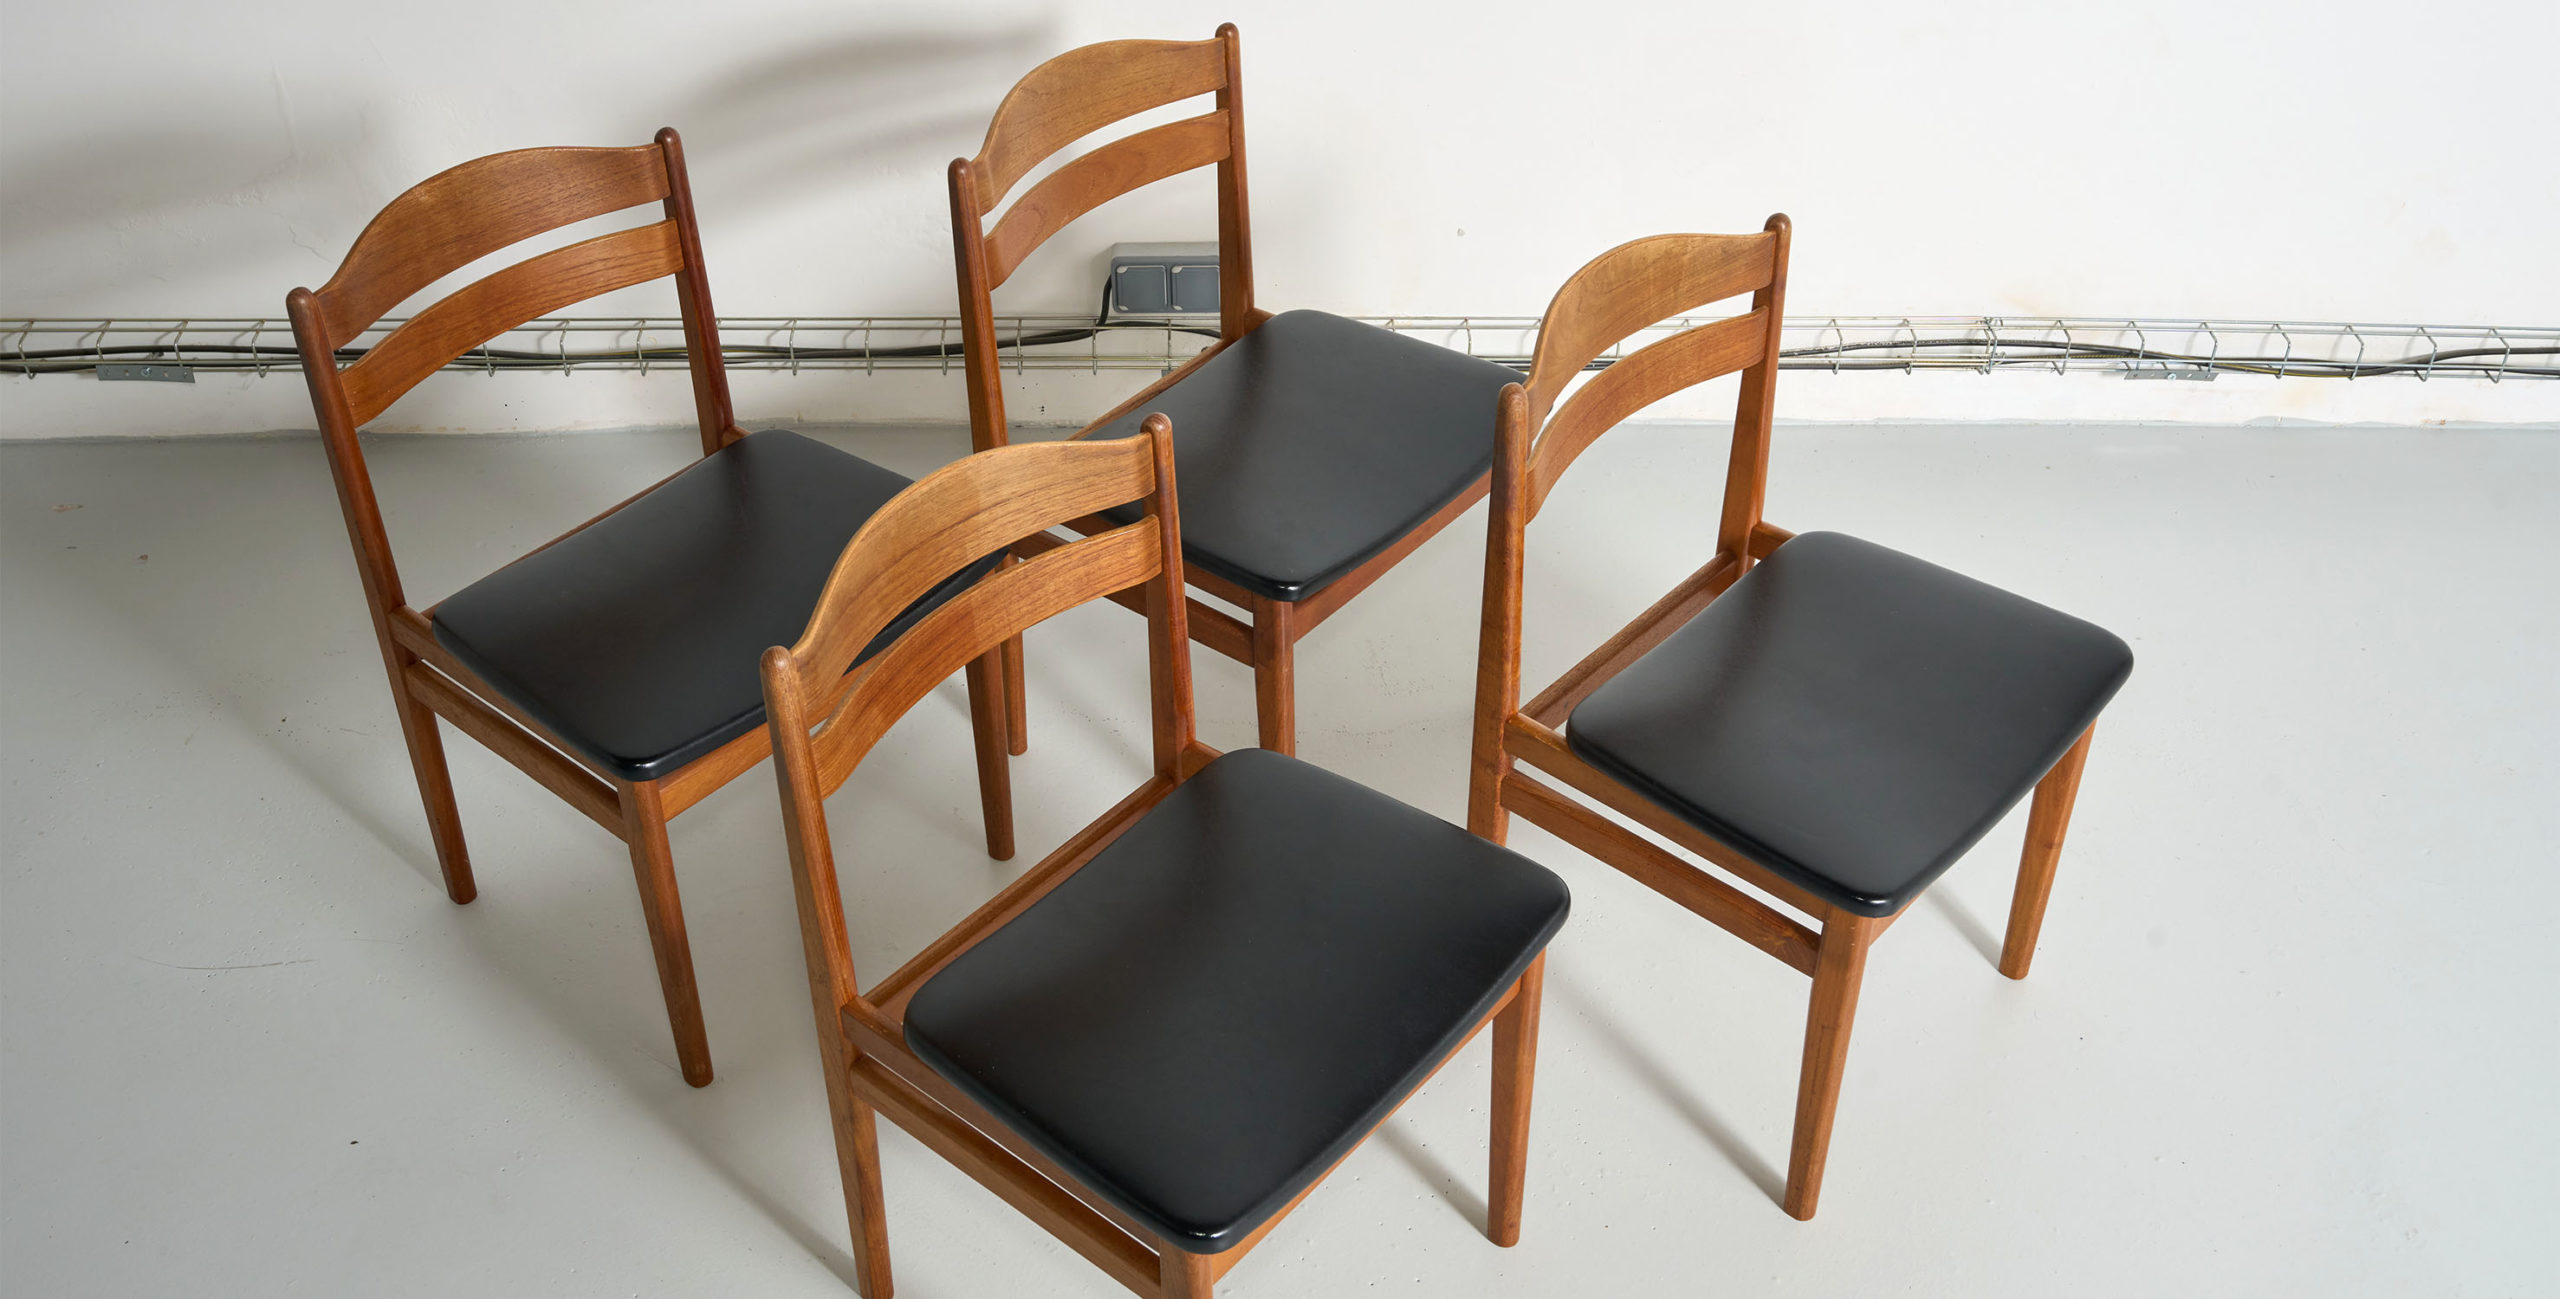 niels vodder, chaises niels vodder, 4 chaises vintage, chaises scandinaves, chaises teck, chaises danoises, chaises teck et skai vintage, chaise noire vintage, 4 chaises scandinaves, 4 chaises anglaises vintage, 4 chaises en teck, 4 chaises vintage en teck, chaises style scandinave, chaises g plan